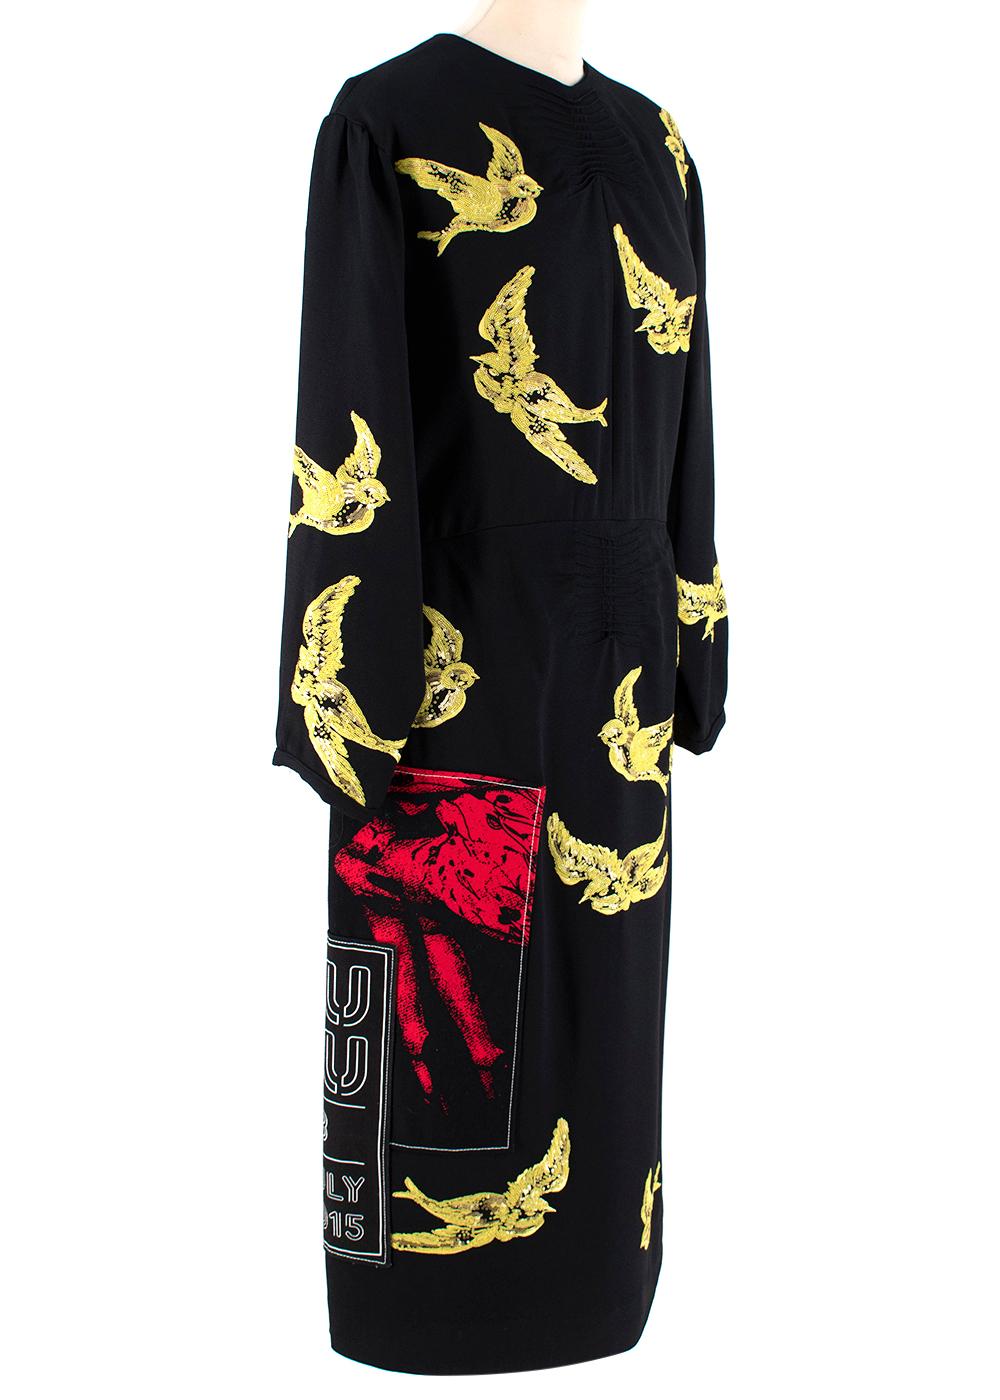 Miu Miu Black & Yellow Sequin Bird Embroidered Dress

-Black midi dress
-Long sleeves with clip closure
-Yellow sequinned bird Embroidered
-Single Vent
-Fully lined 
-Round neck
-Clip closure behind the neck
-Hidden side zip

Material:
81%